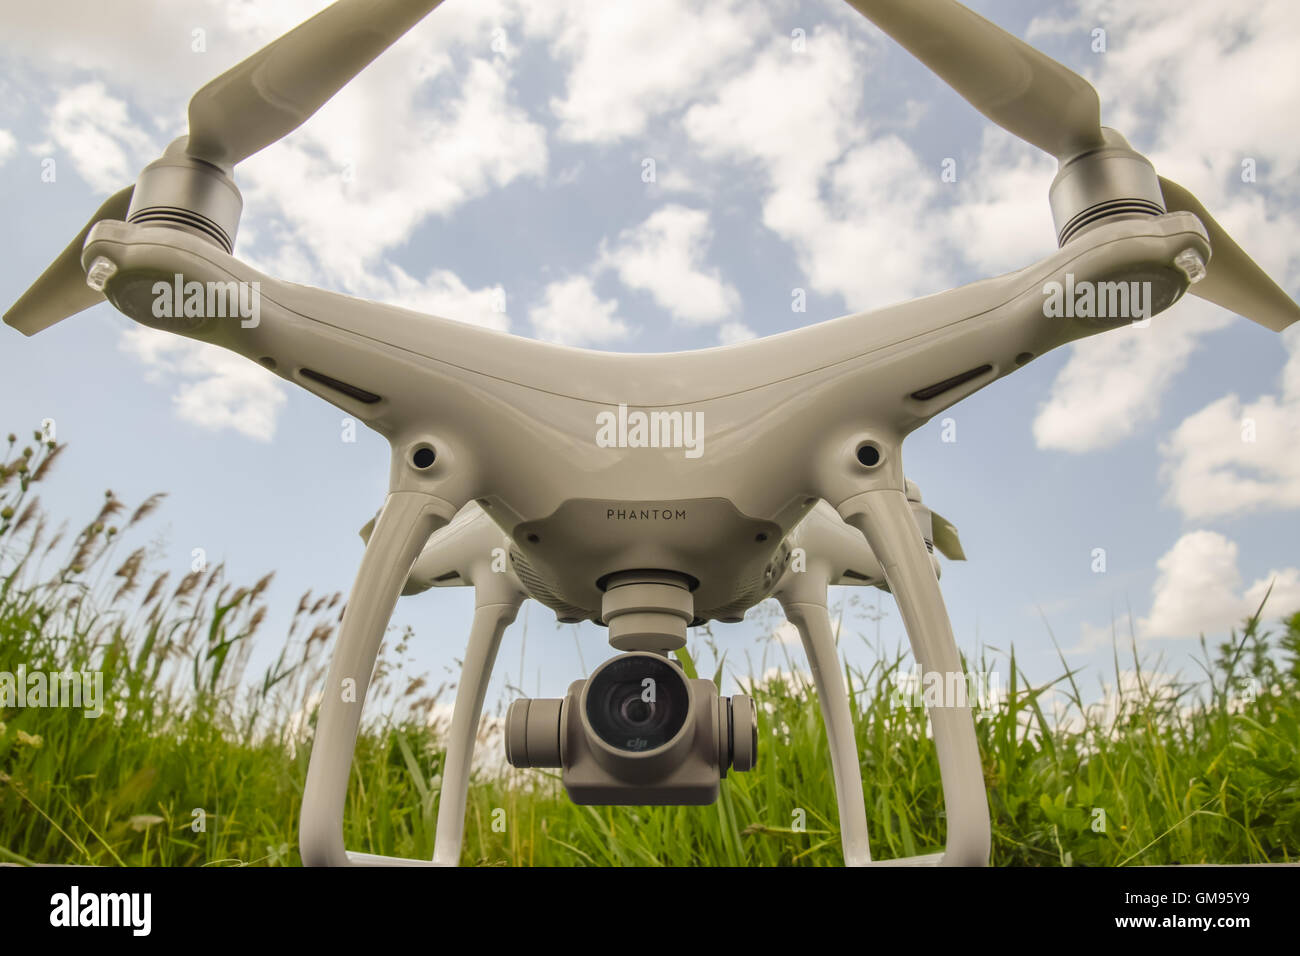 Russia, Poltavskaya village - May 1, 2016: Quadrocopters on a plastic box in the grass. Preparation quadrocopter to fly. Stock Photo